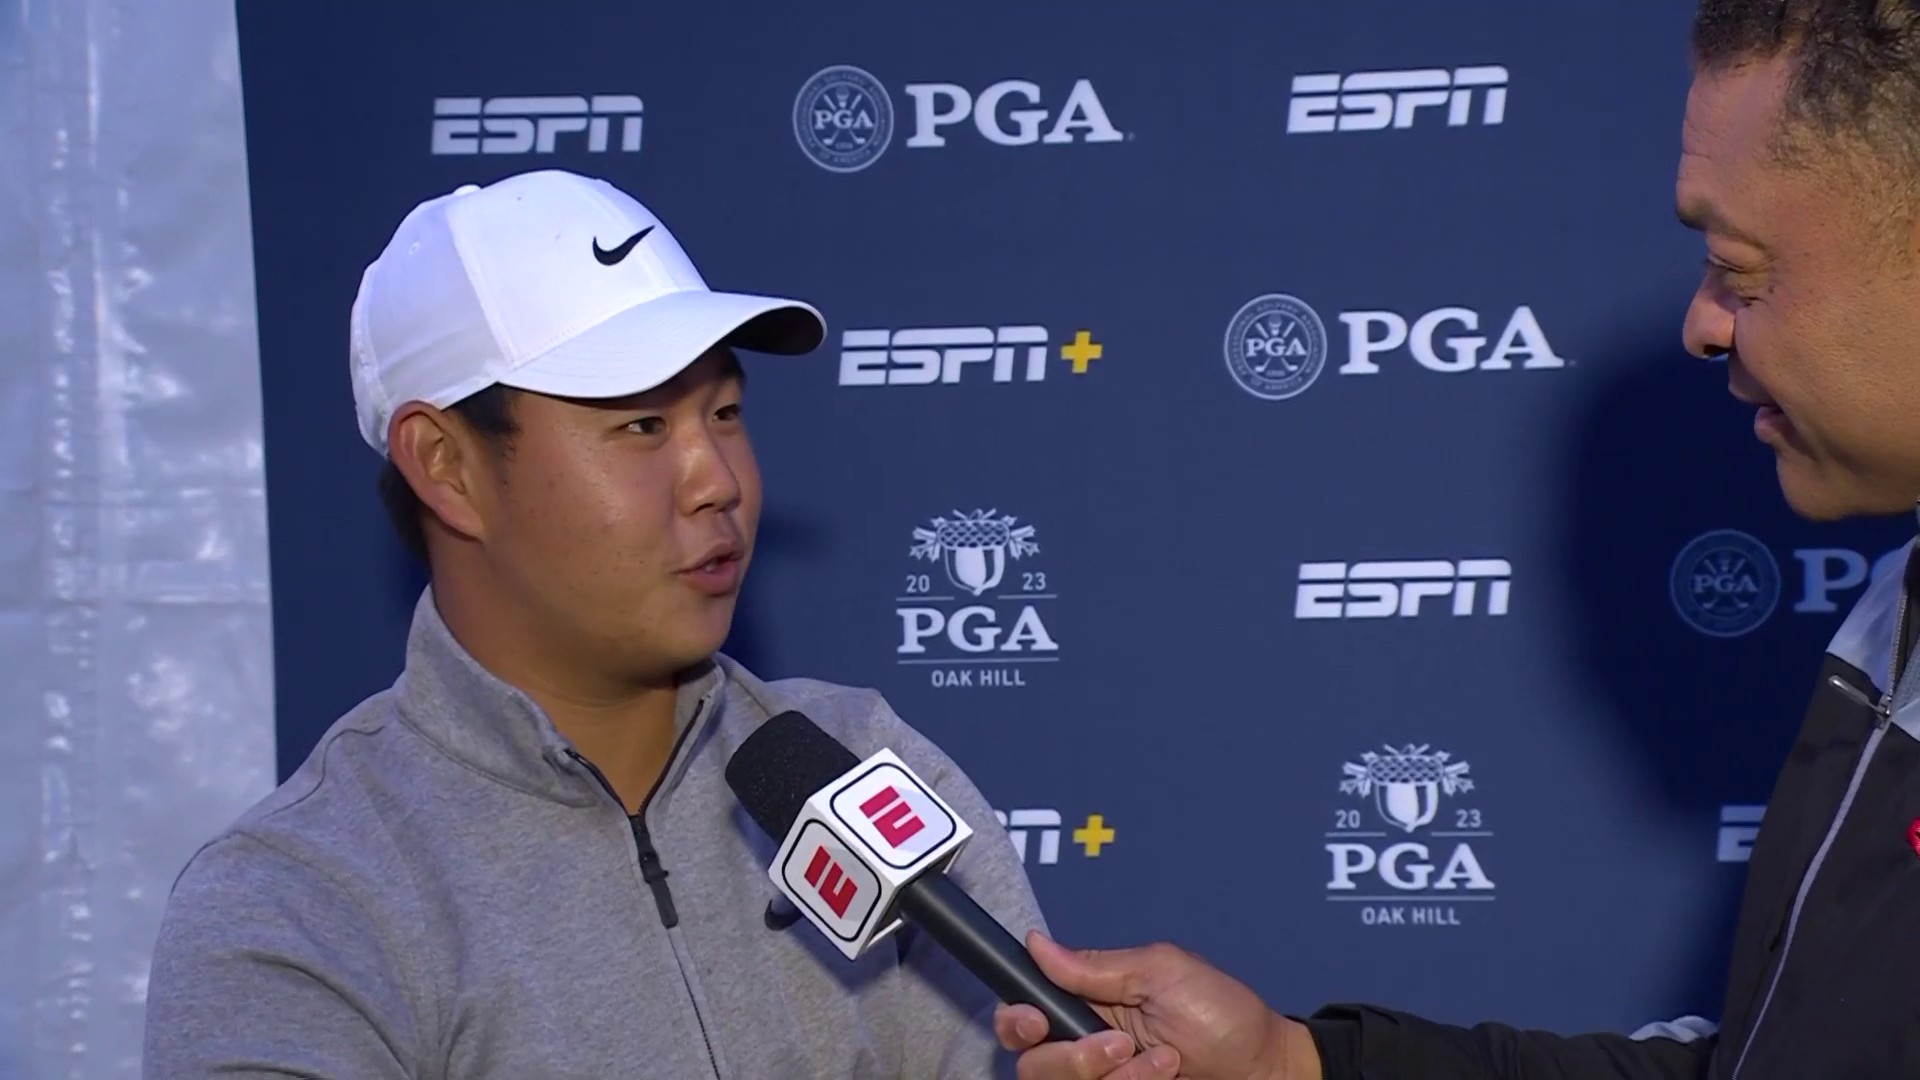 Tom Kim Reacts to and Discusses Muddy Adventure PGA Championship